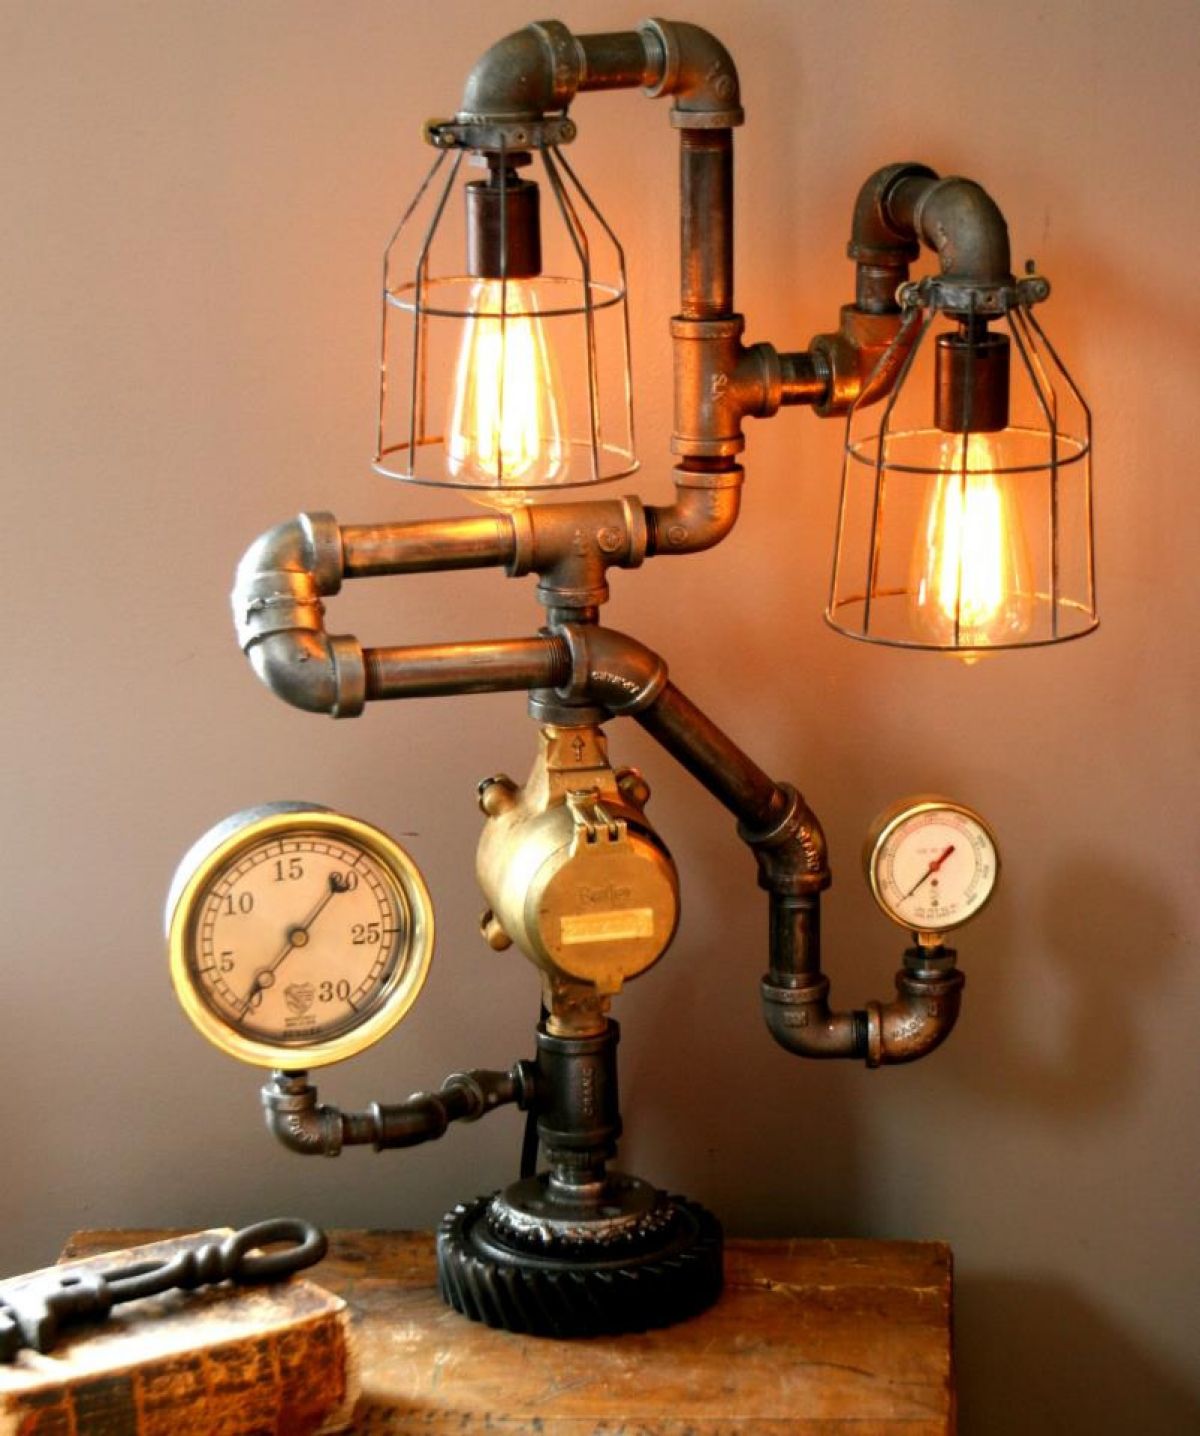 Steampunk lamps - 25 ways to add a touch of vintage and high ranked